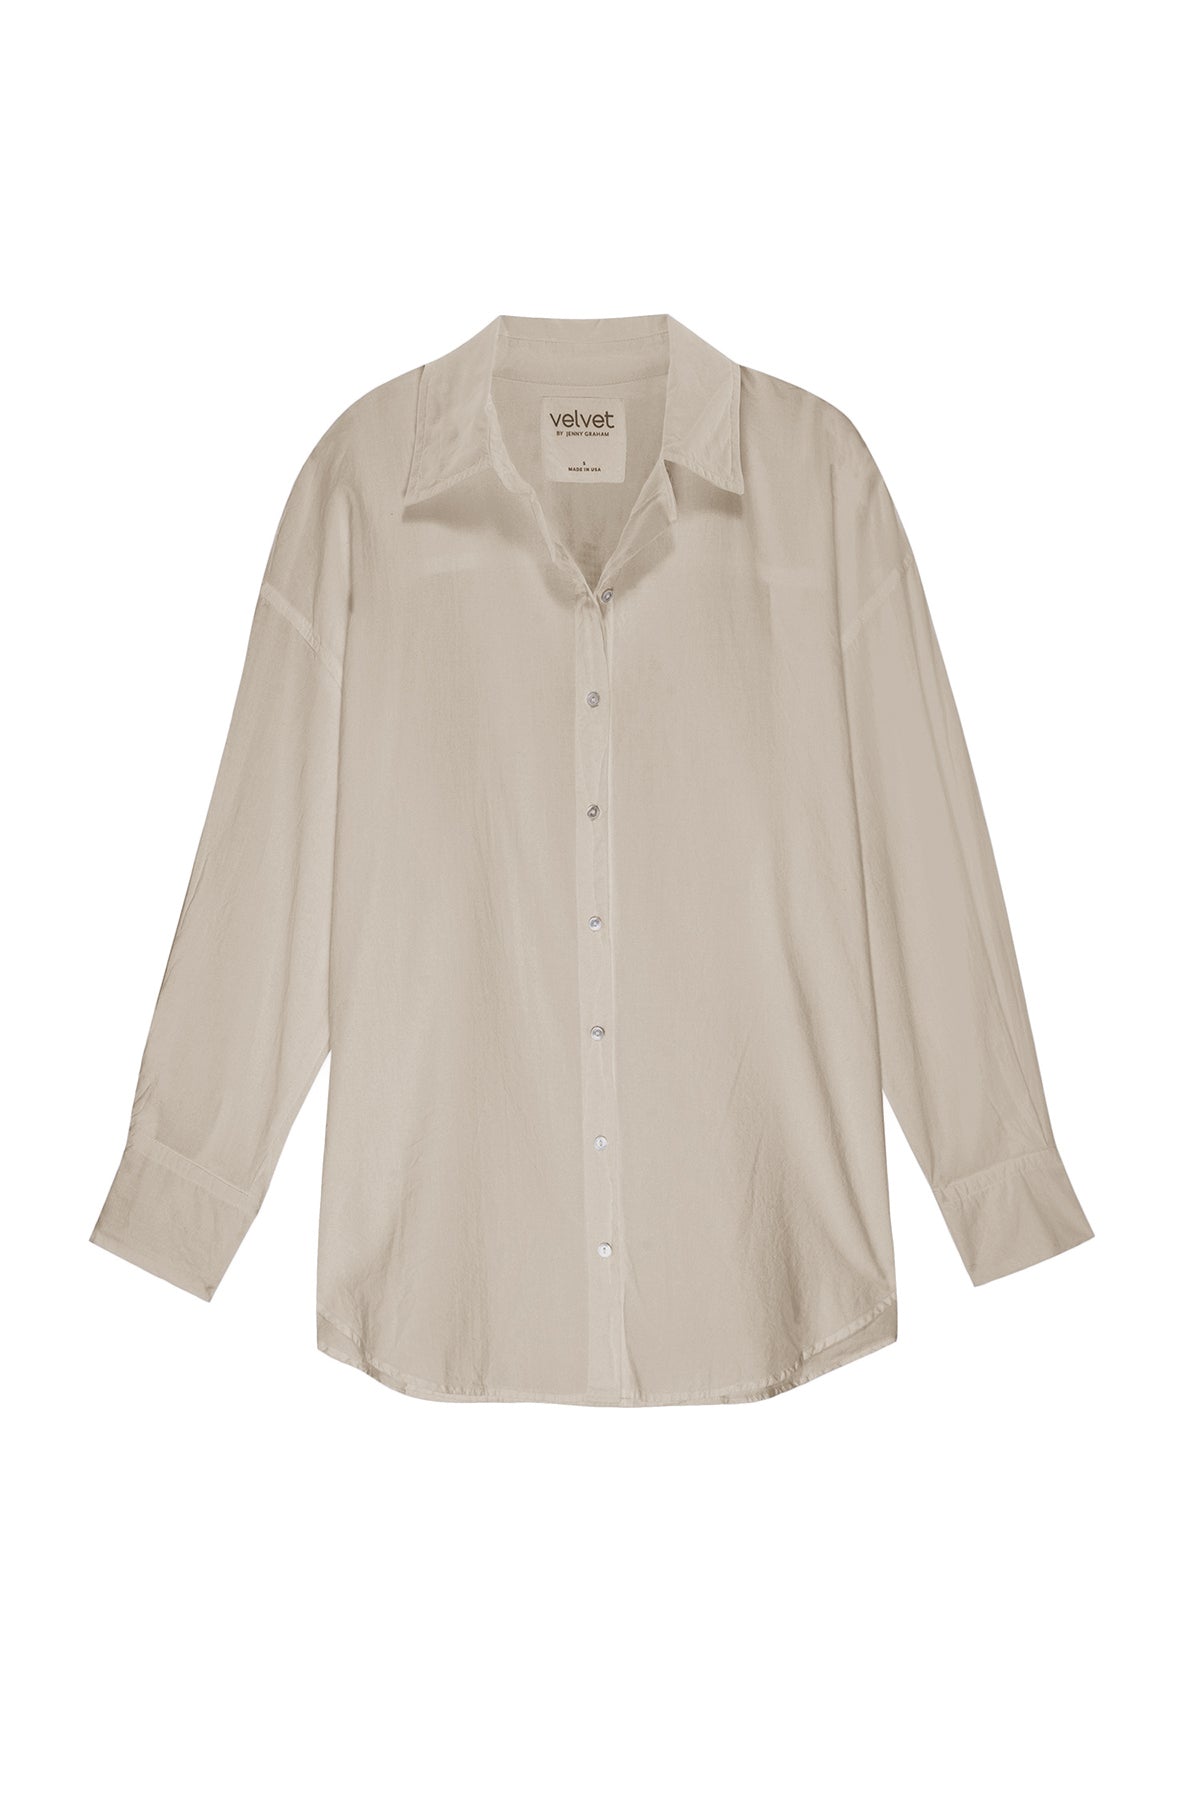   a Velvet by Jenny Graham REDONDO BUTTON-UP SHIRT in beige. 